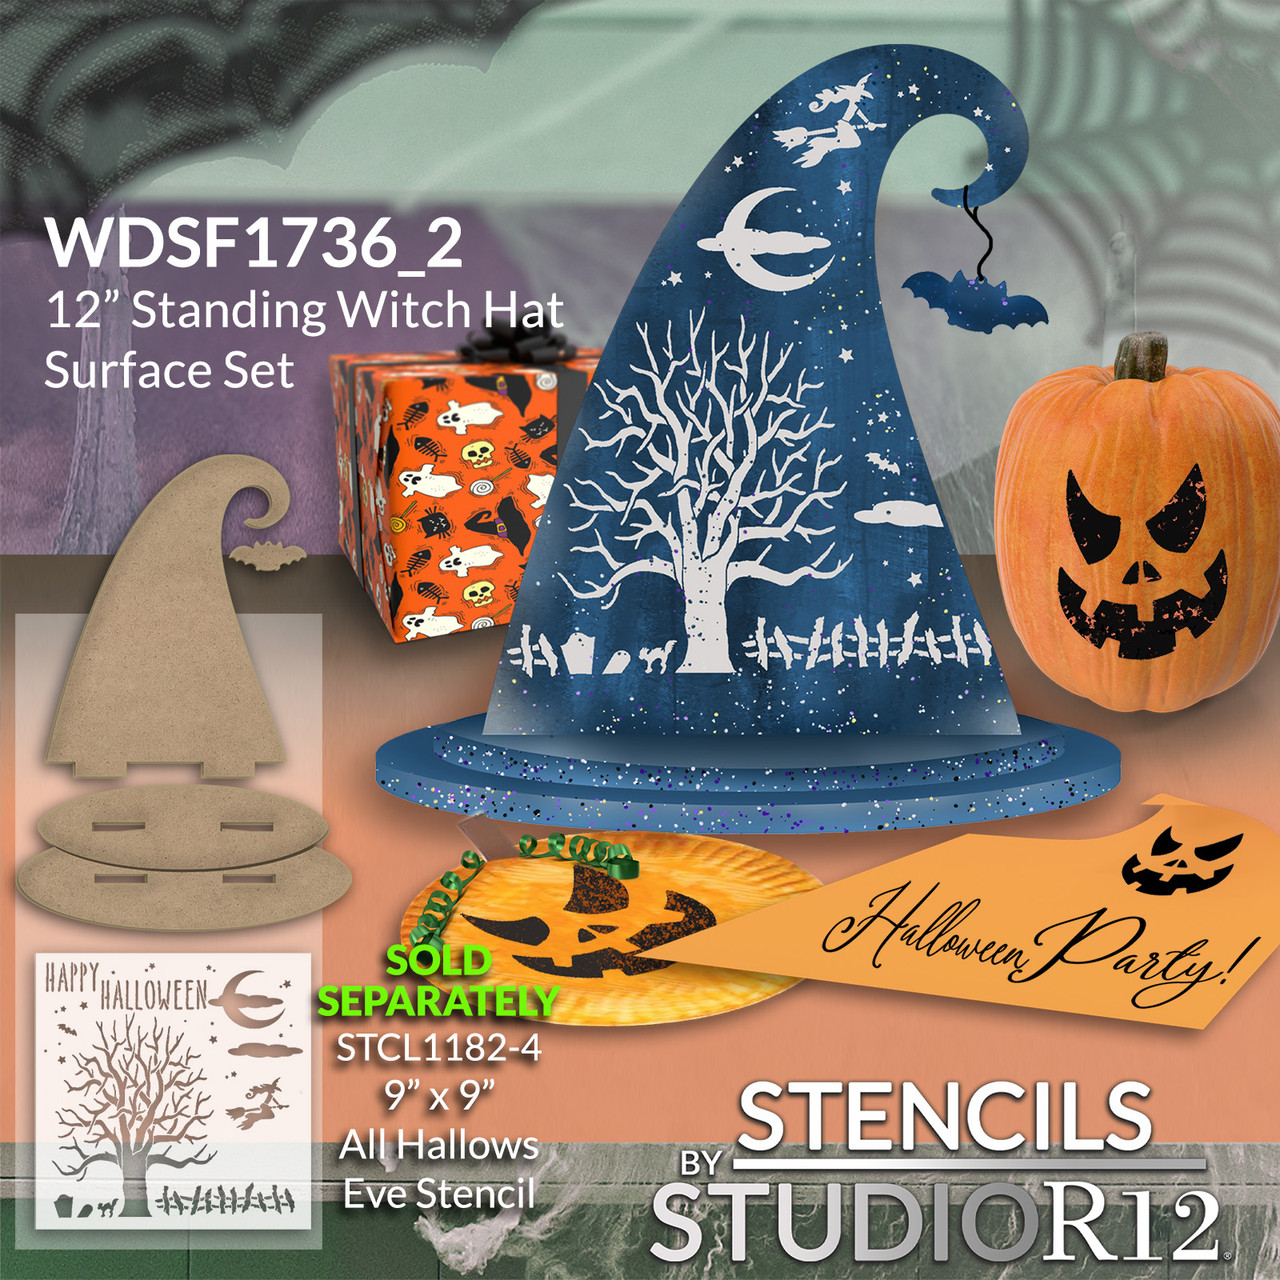 Standing Witch Hat Wood Surface by StudioR12 - Ready to Paint Unfinished Wood Surface for Fall Crafting - DIY Halloween Home Decor - WDSF1736